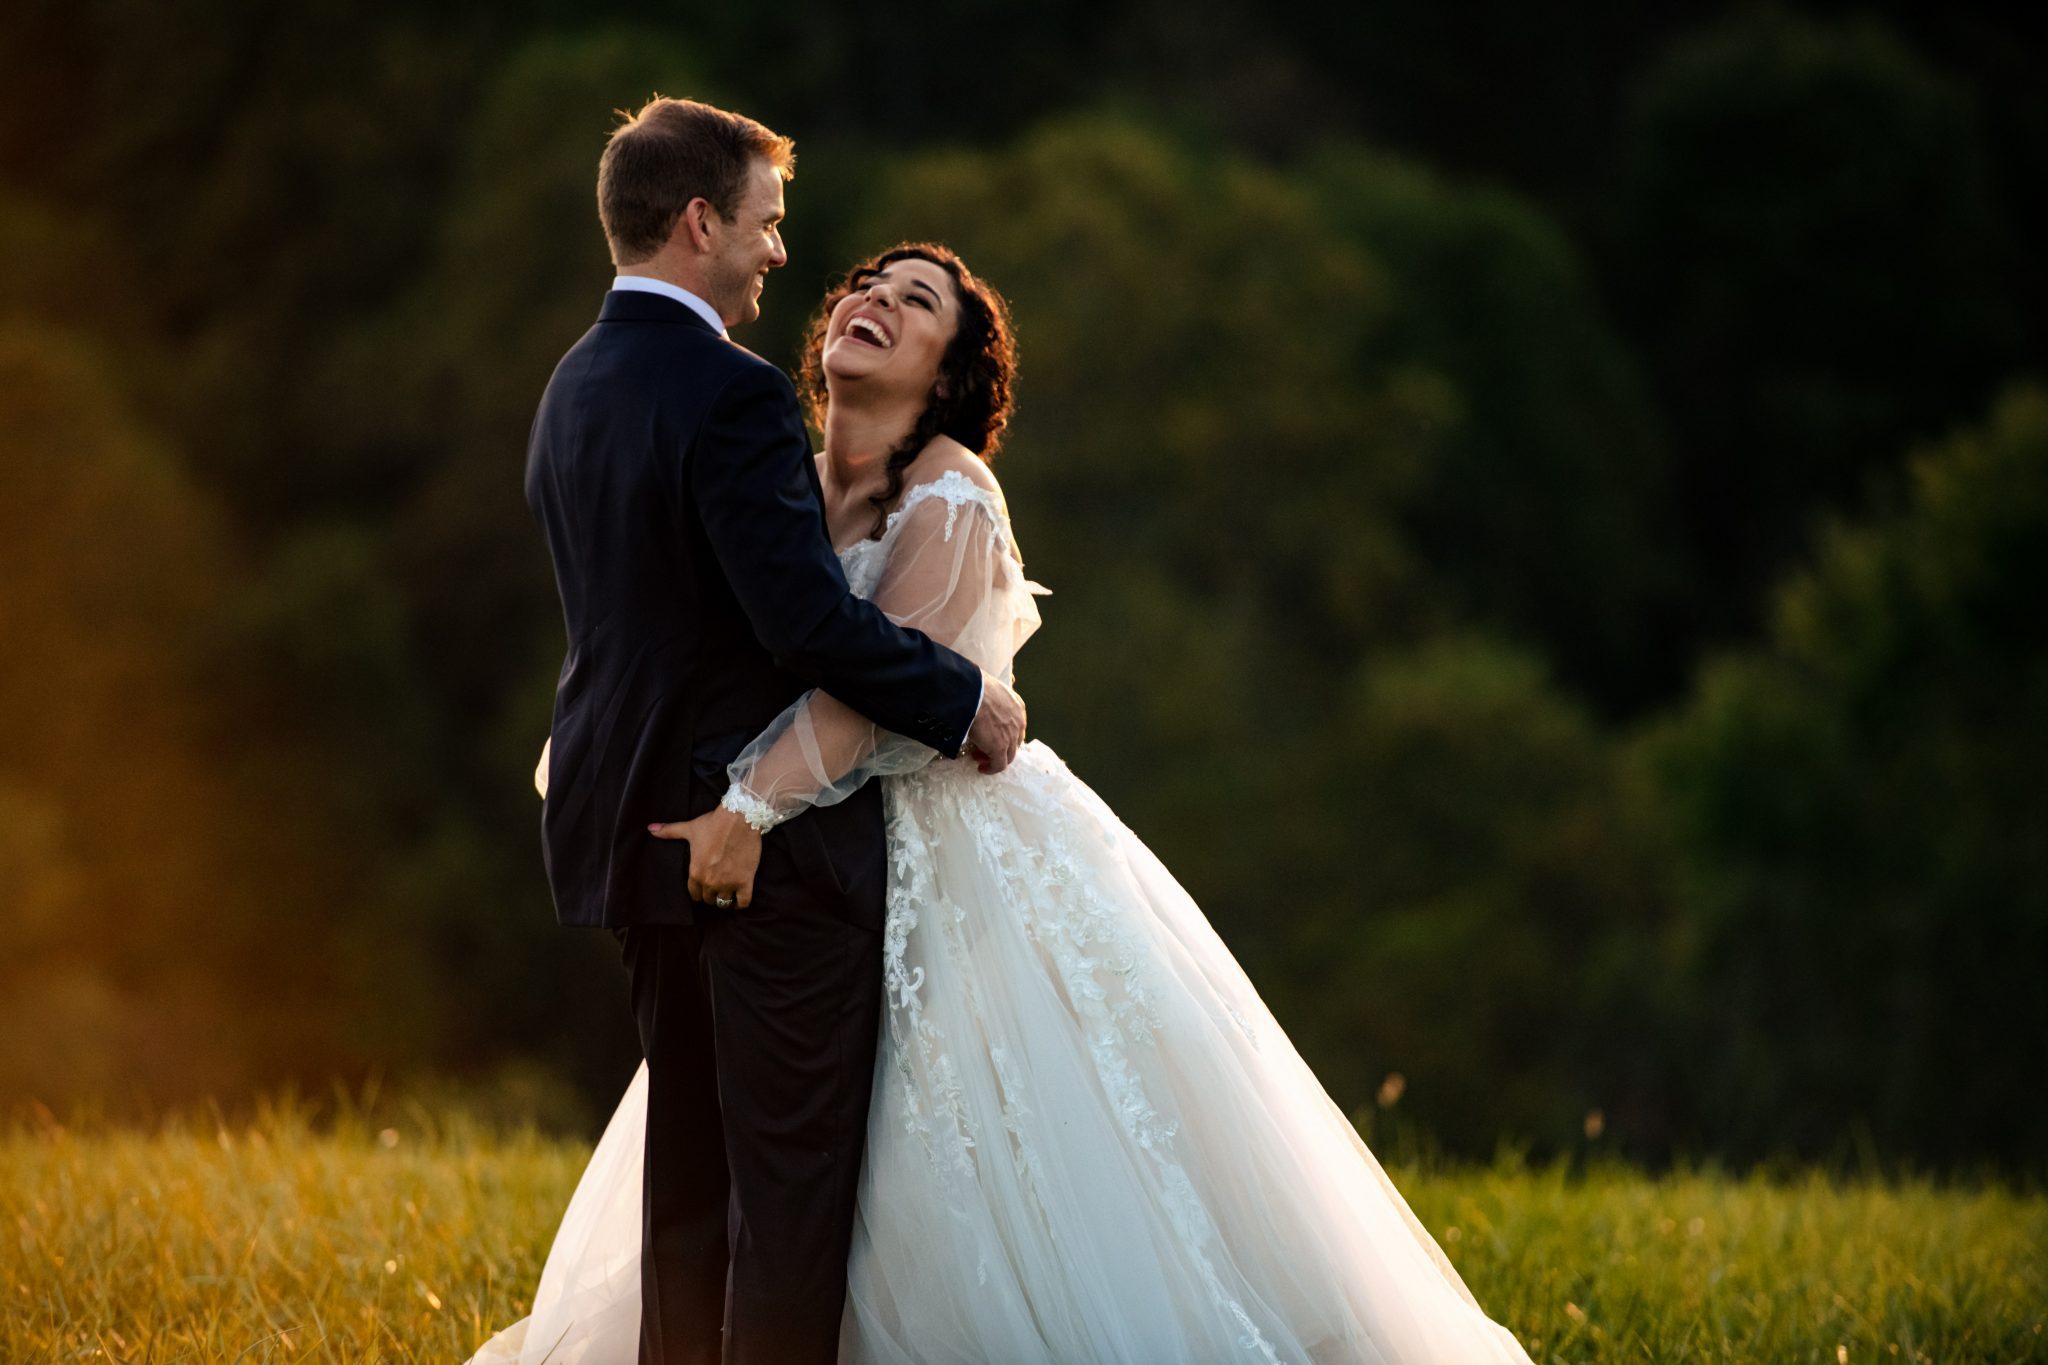 Bride grabbing Groom's butt in laughing shot while being a second photographer